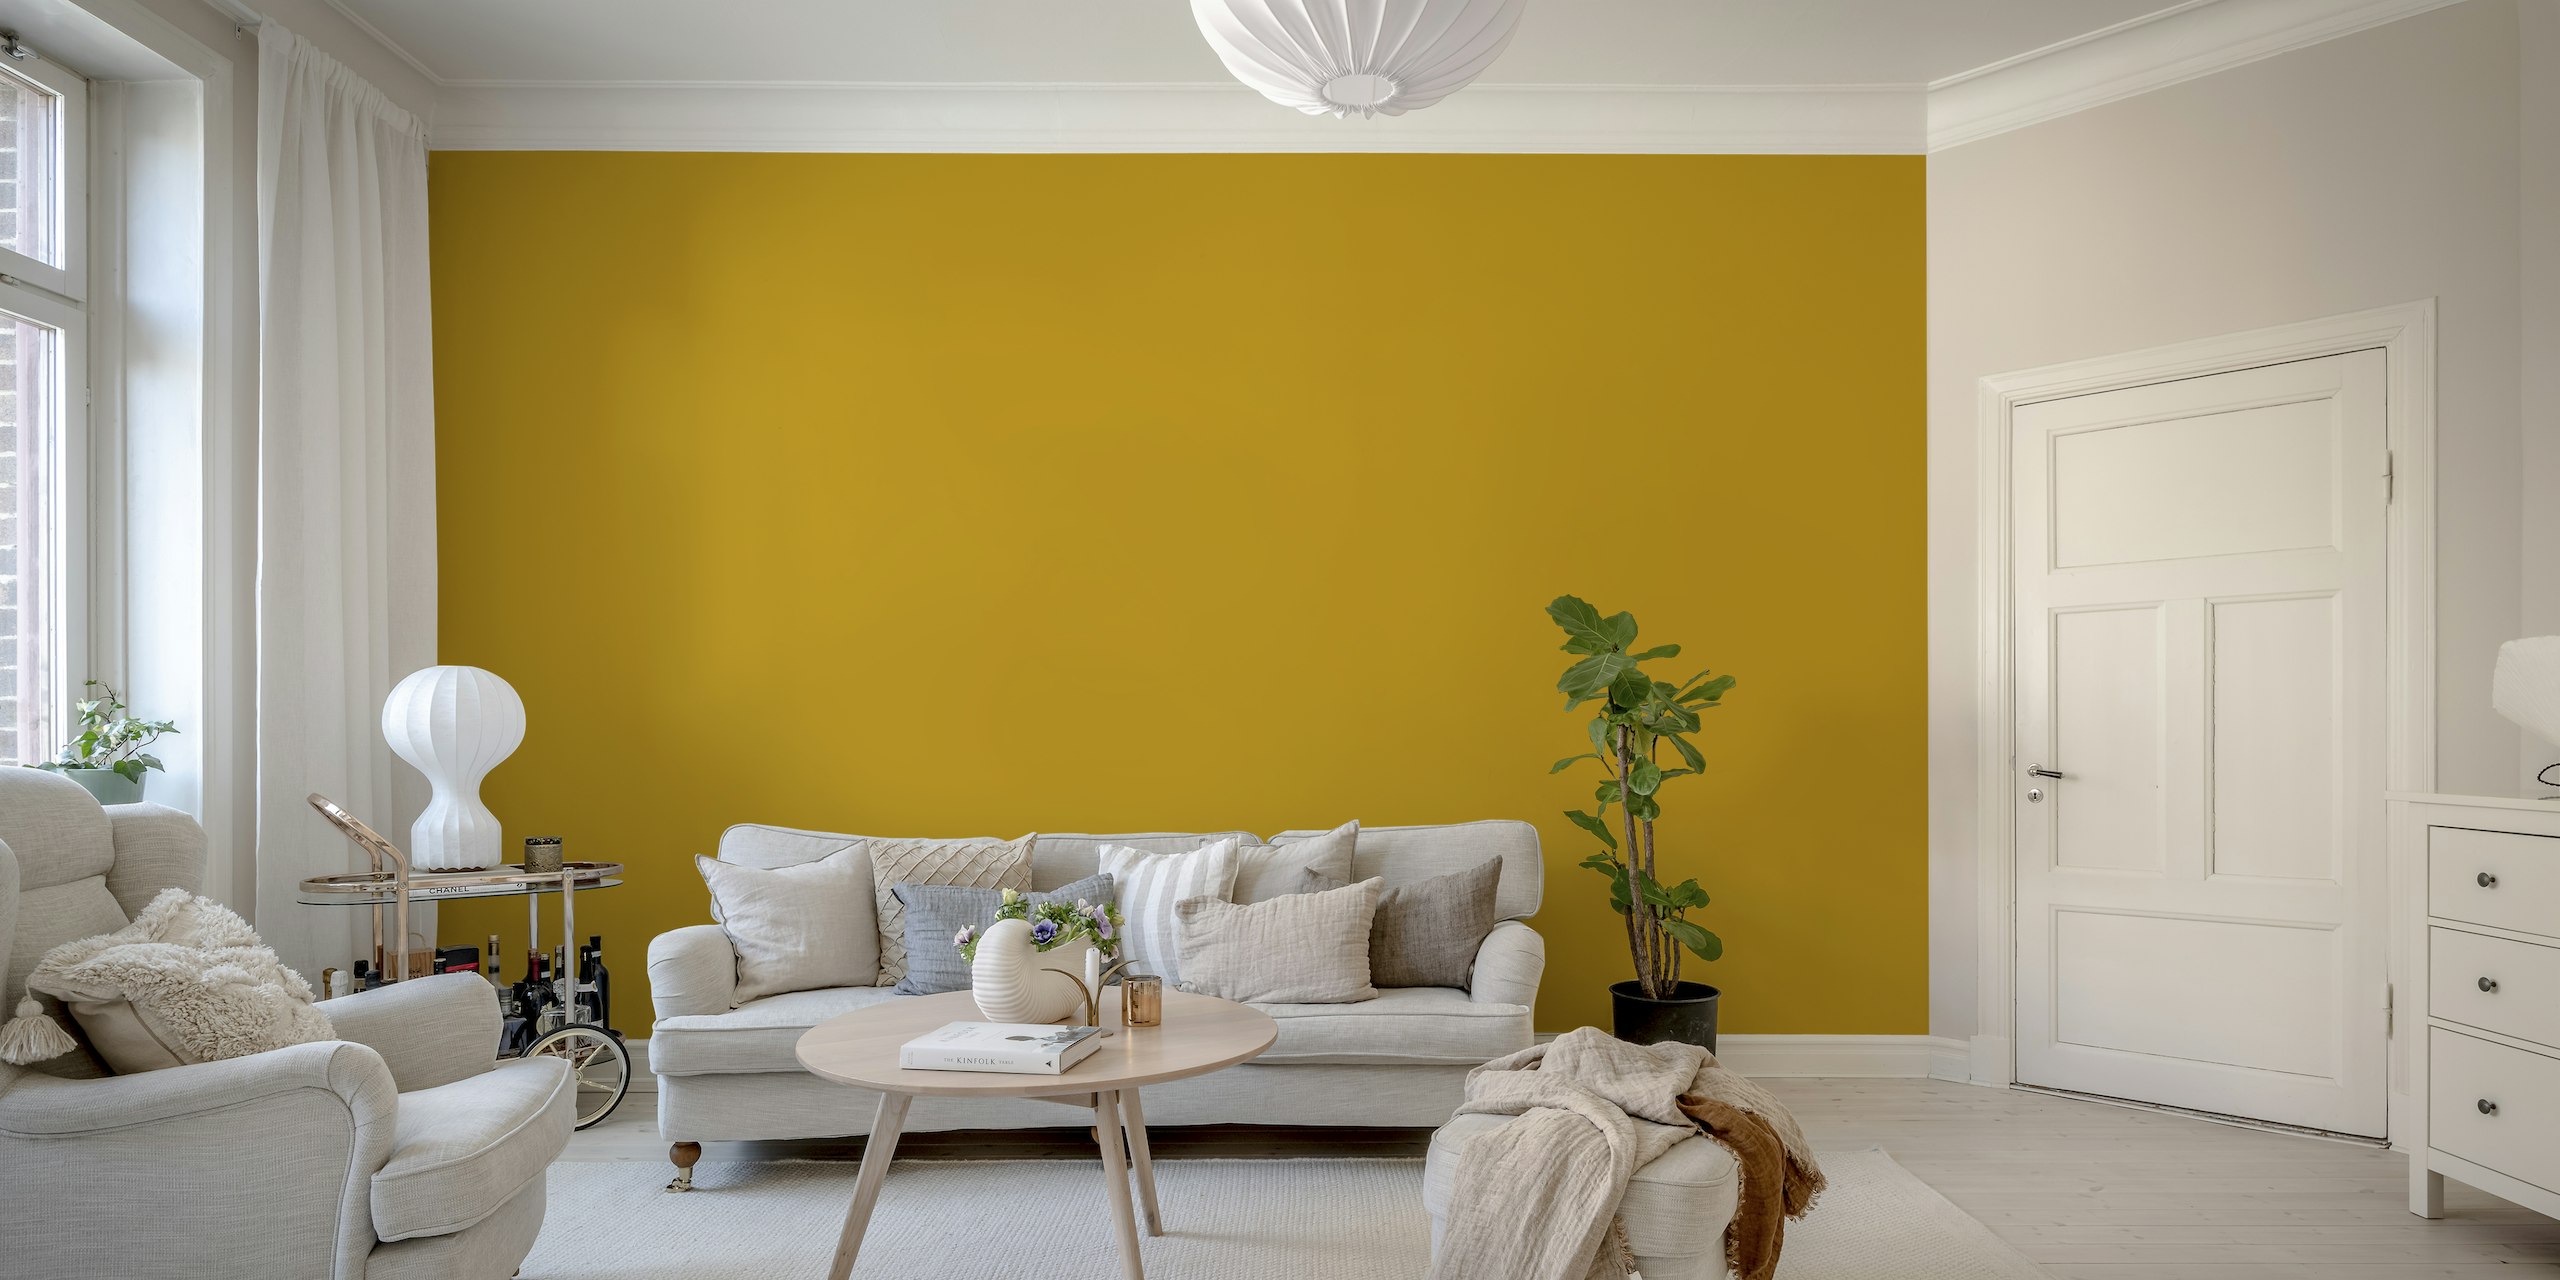 Dark gold textured wall mural from happywall.com